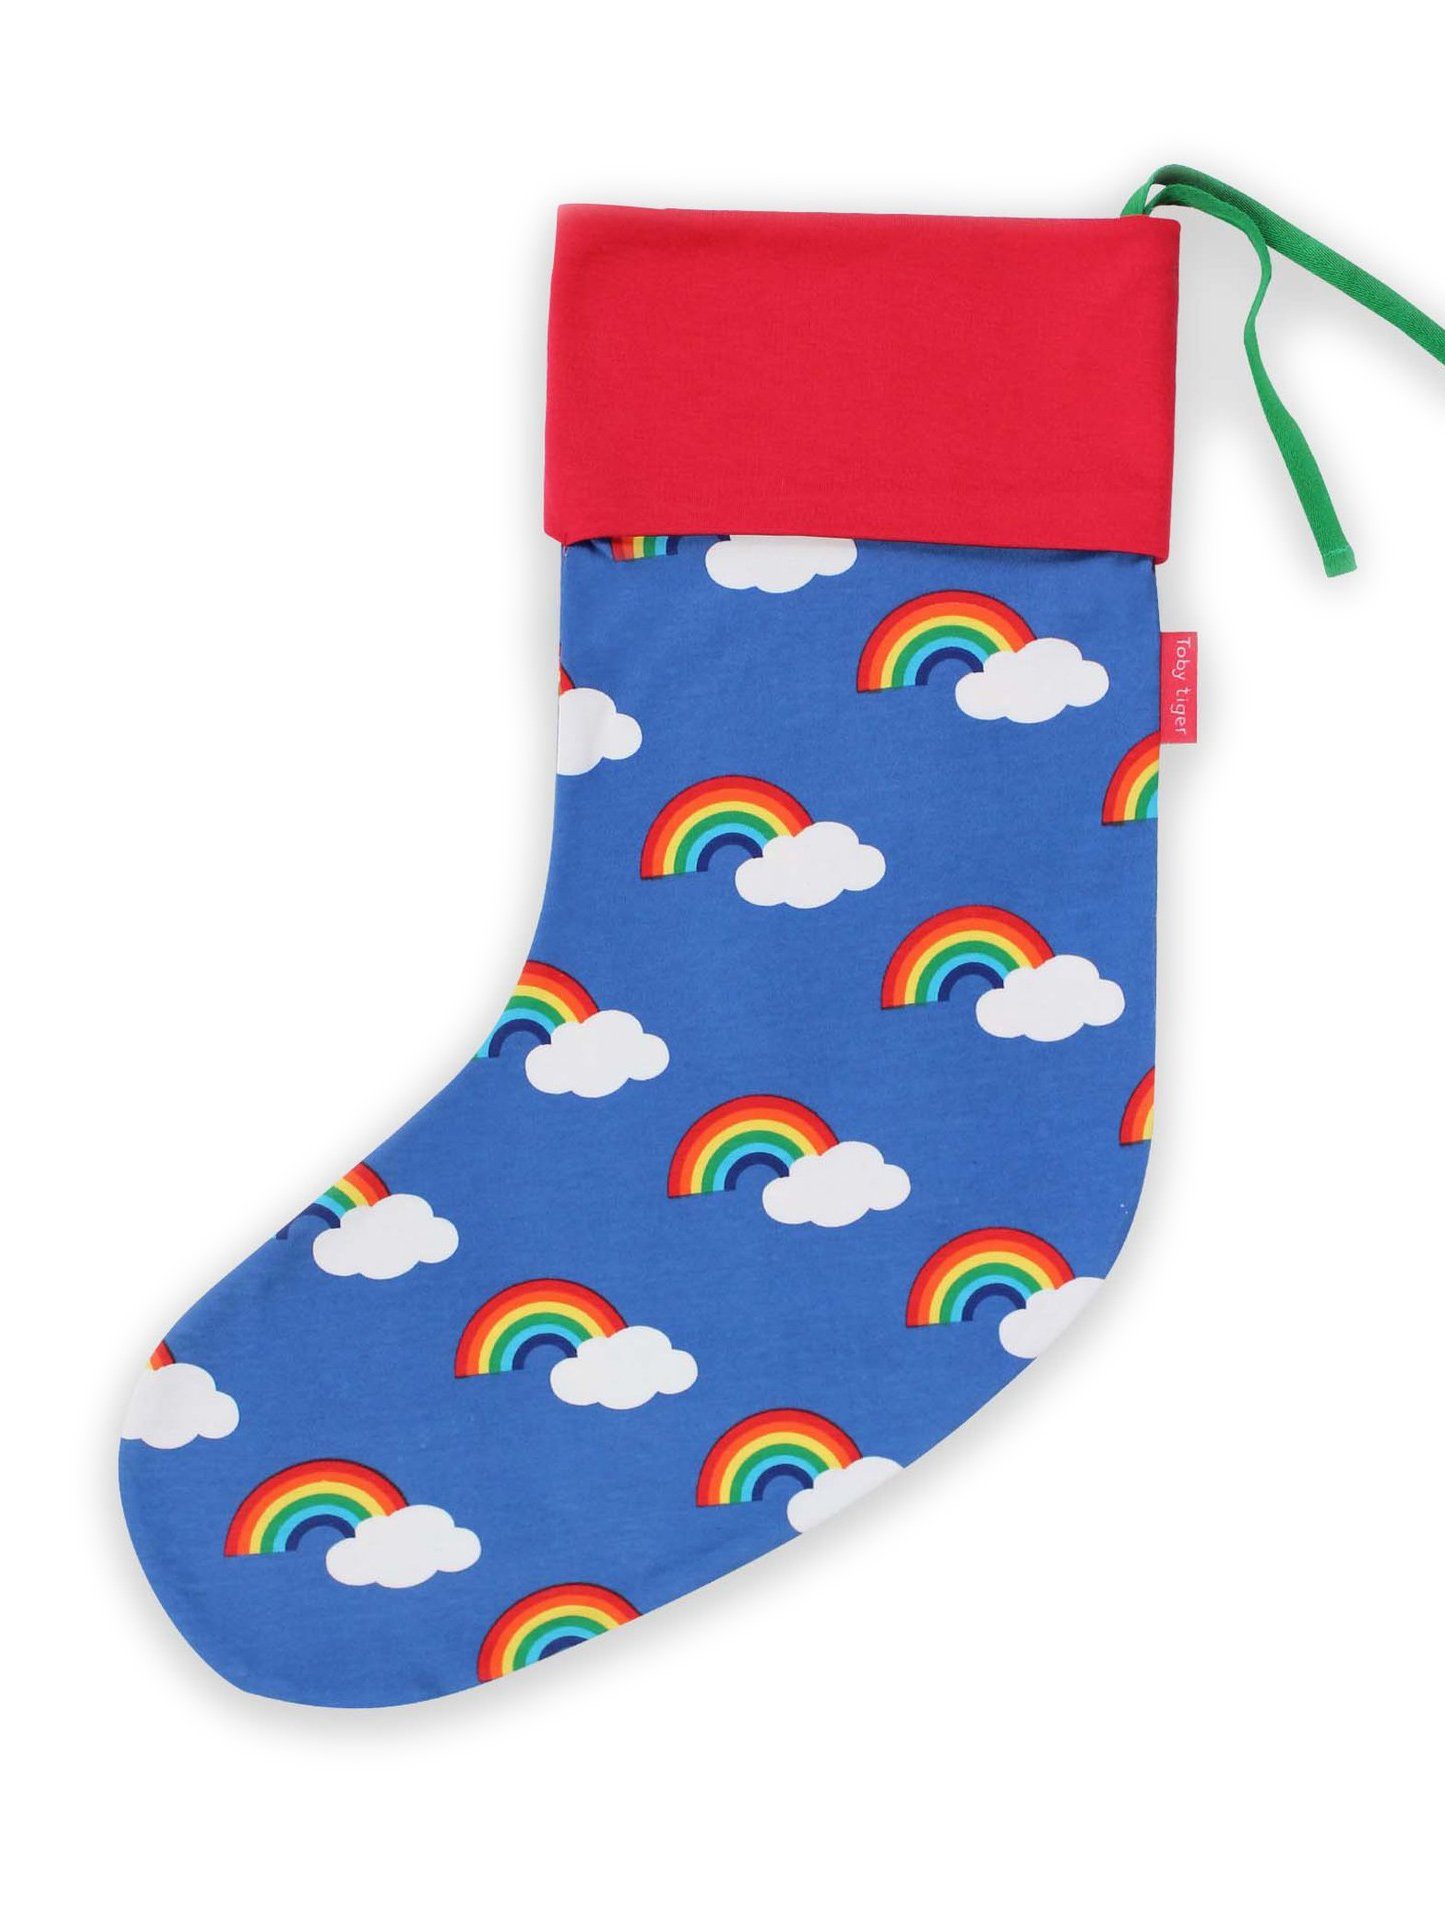 Organic Blue Rainbow Stocking by Toby Tiger - Toy - Toby Tiger